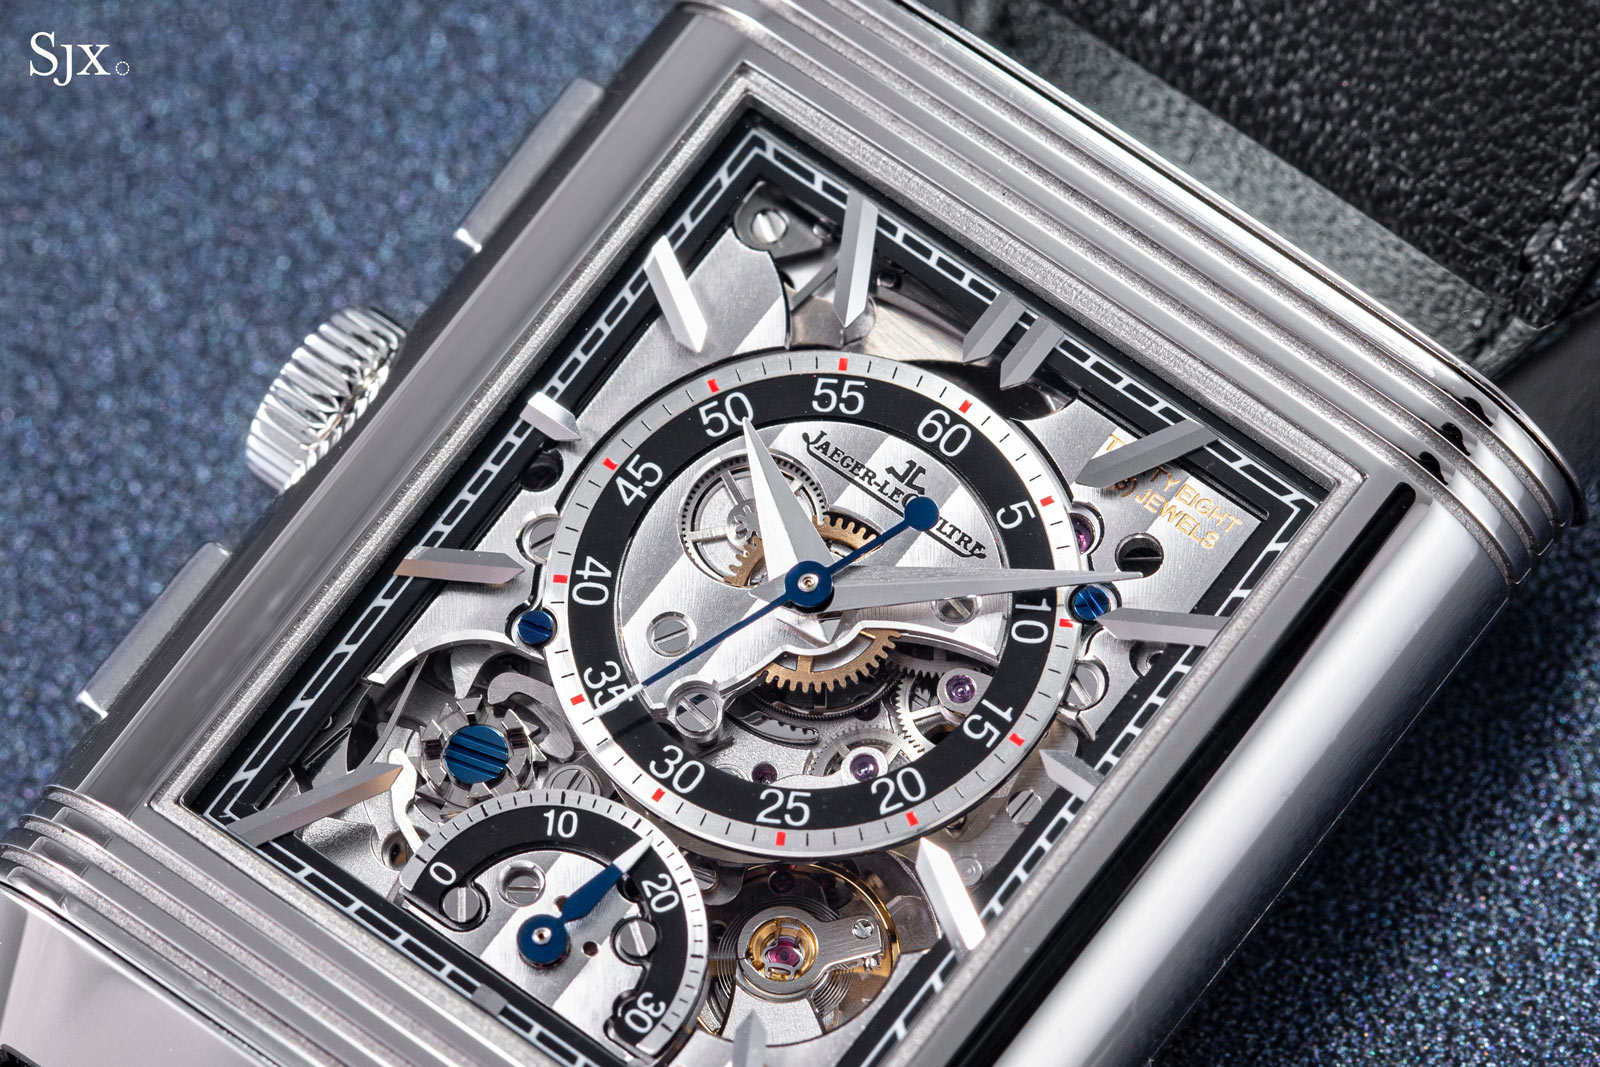 Hands On: The Jaeger-LeCoultre Reverso Tribute Chronograph | SJX Watches